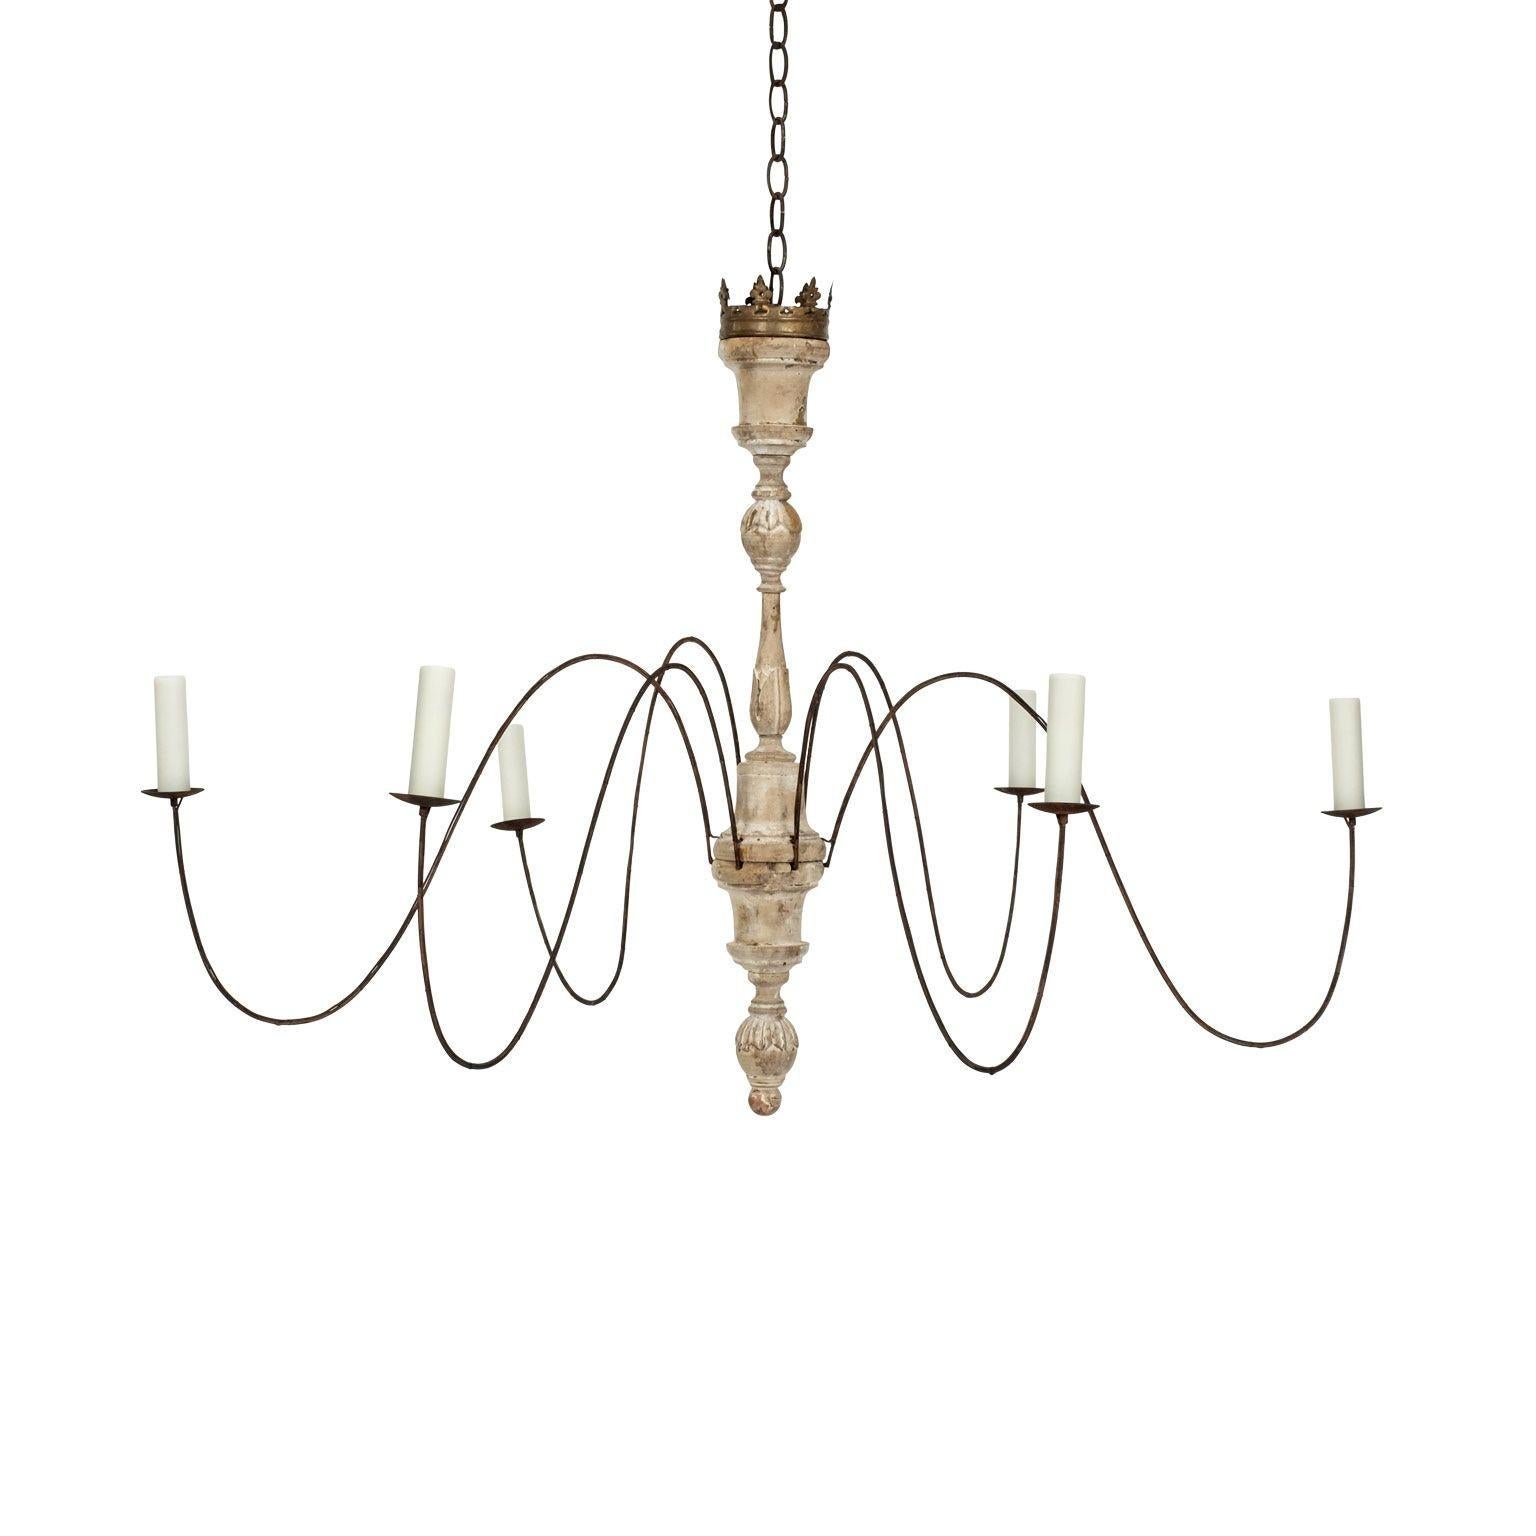 Six-arm Italian chandelier from antique hand-carved elements. Retains remnants of original gesso and some gilding. Newly wired for use within the USA. Includes four feet of chain and a canopy (listed height does not include the chain).